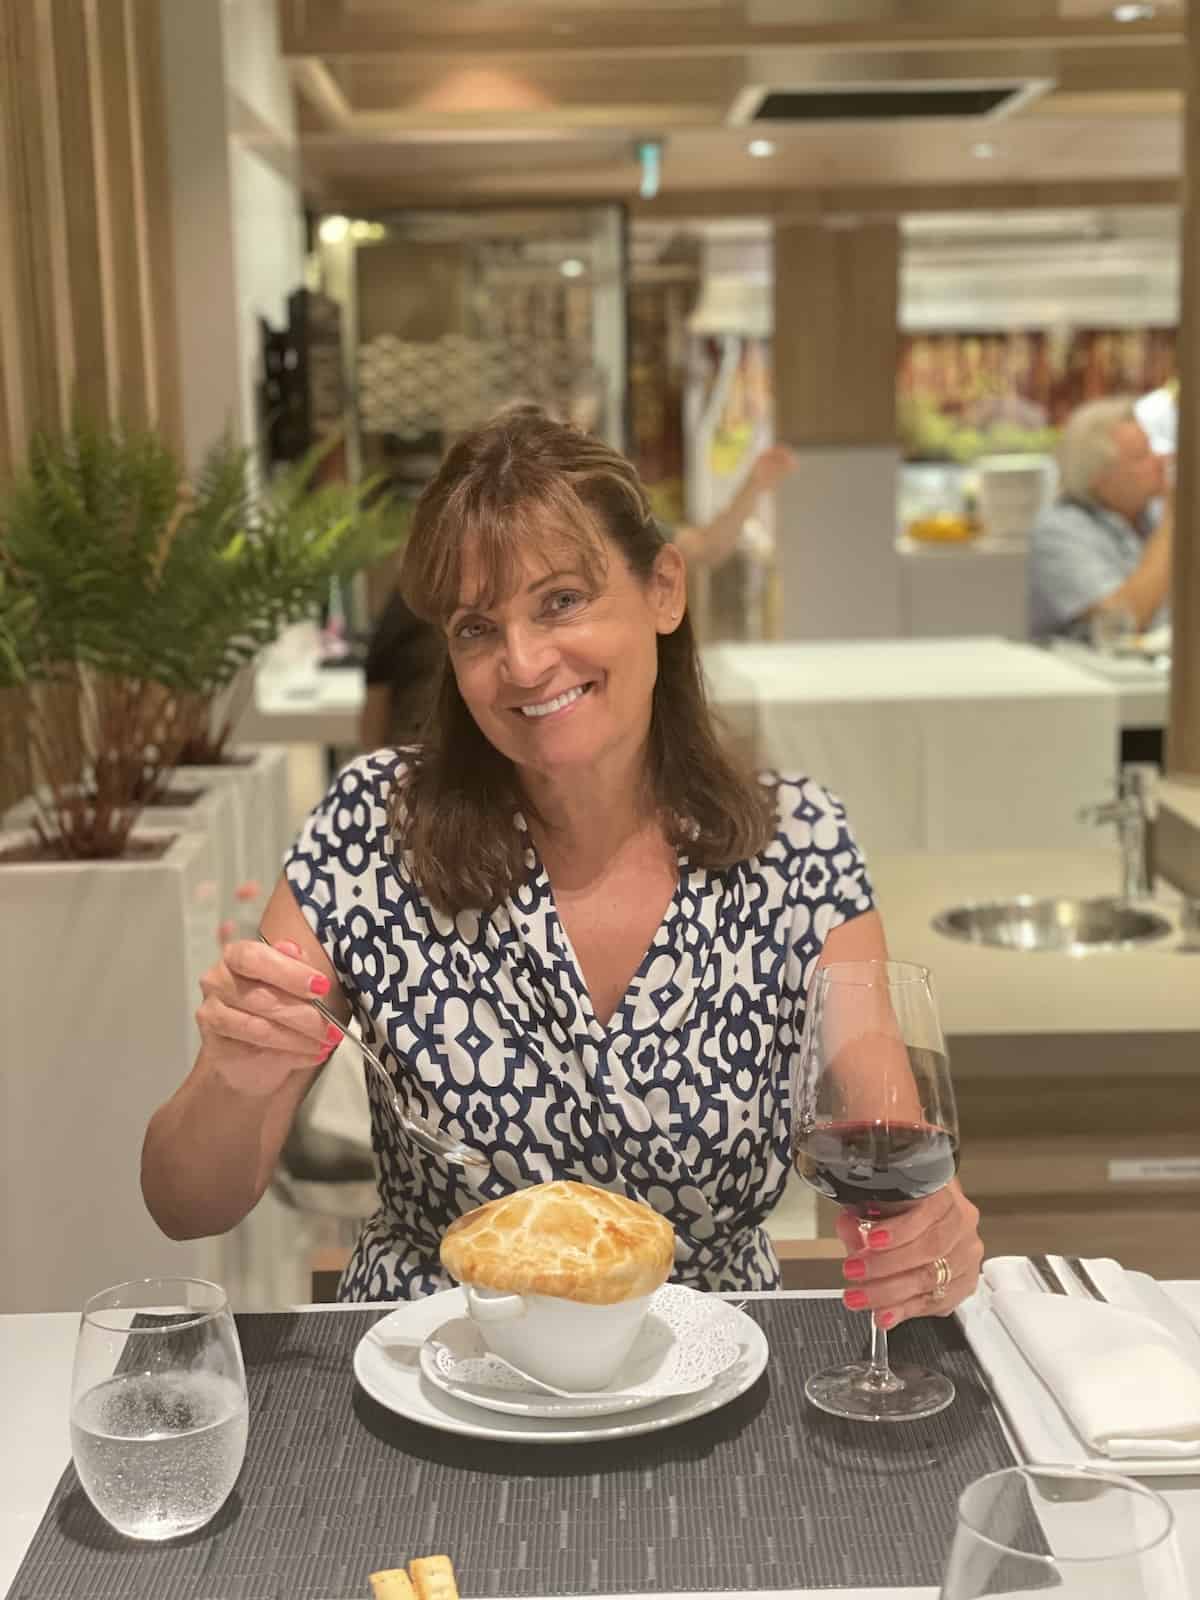 Woman dining with a glass of red wine.